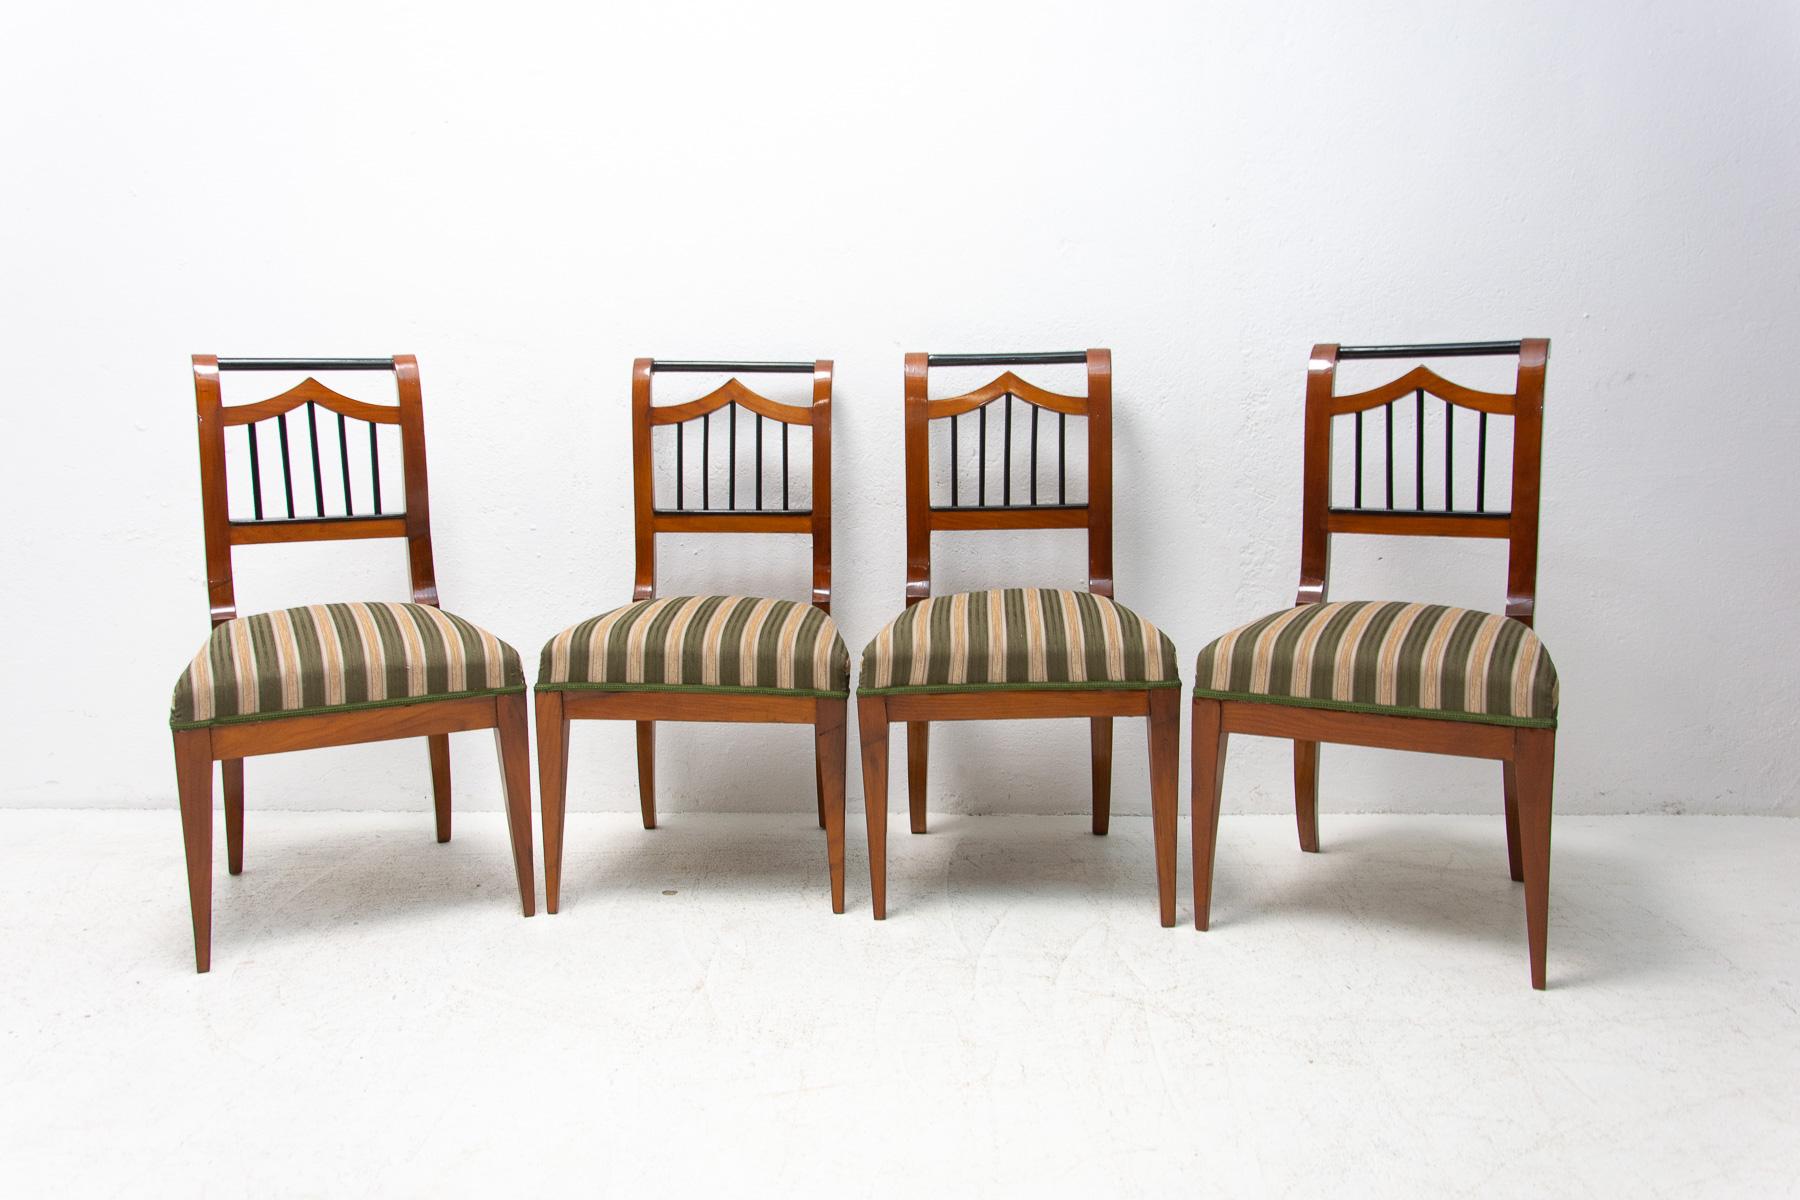 These beautiful Biedermeier dining chairs were made in Austria-Hungary around 1830.
They are made of cherry wood. The chairs are fully renovated, the surface is polished to a high gloss using shellac, new upholstery and period style